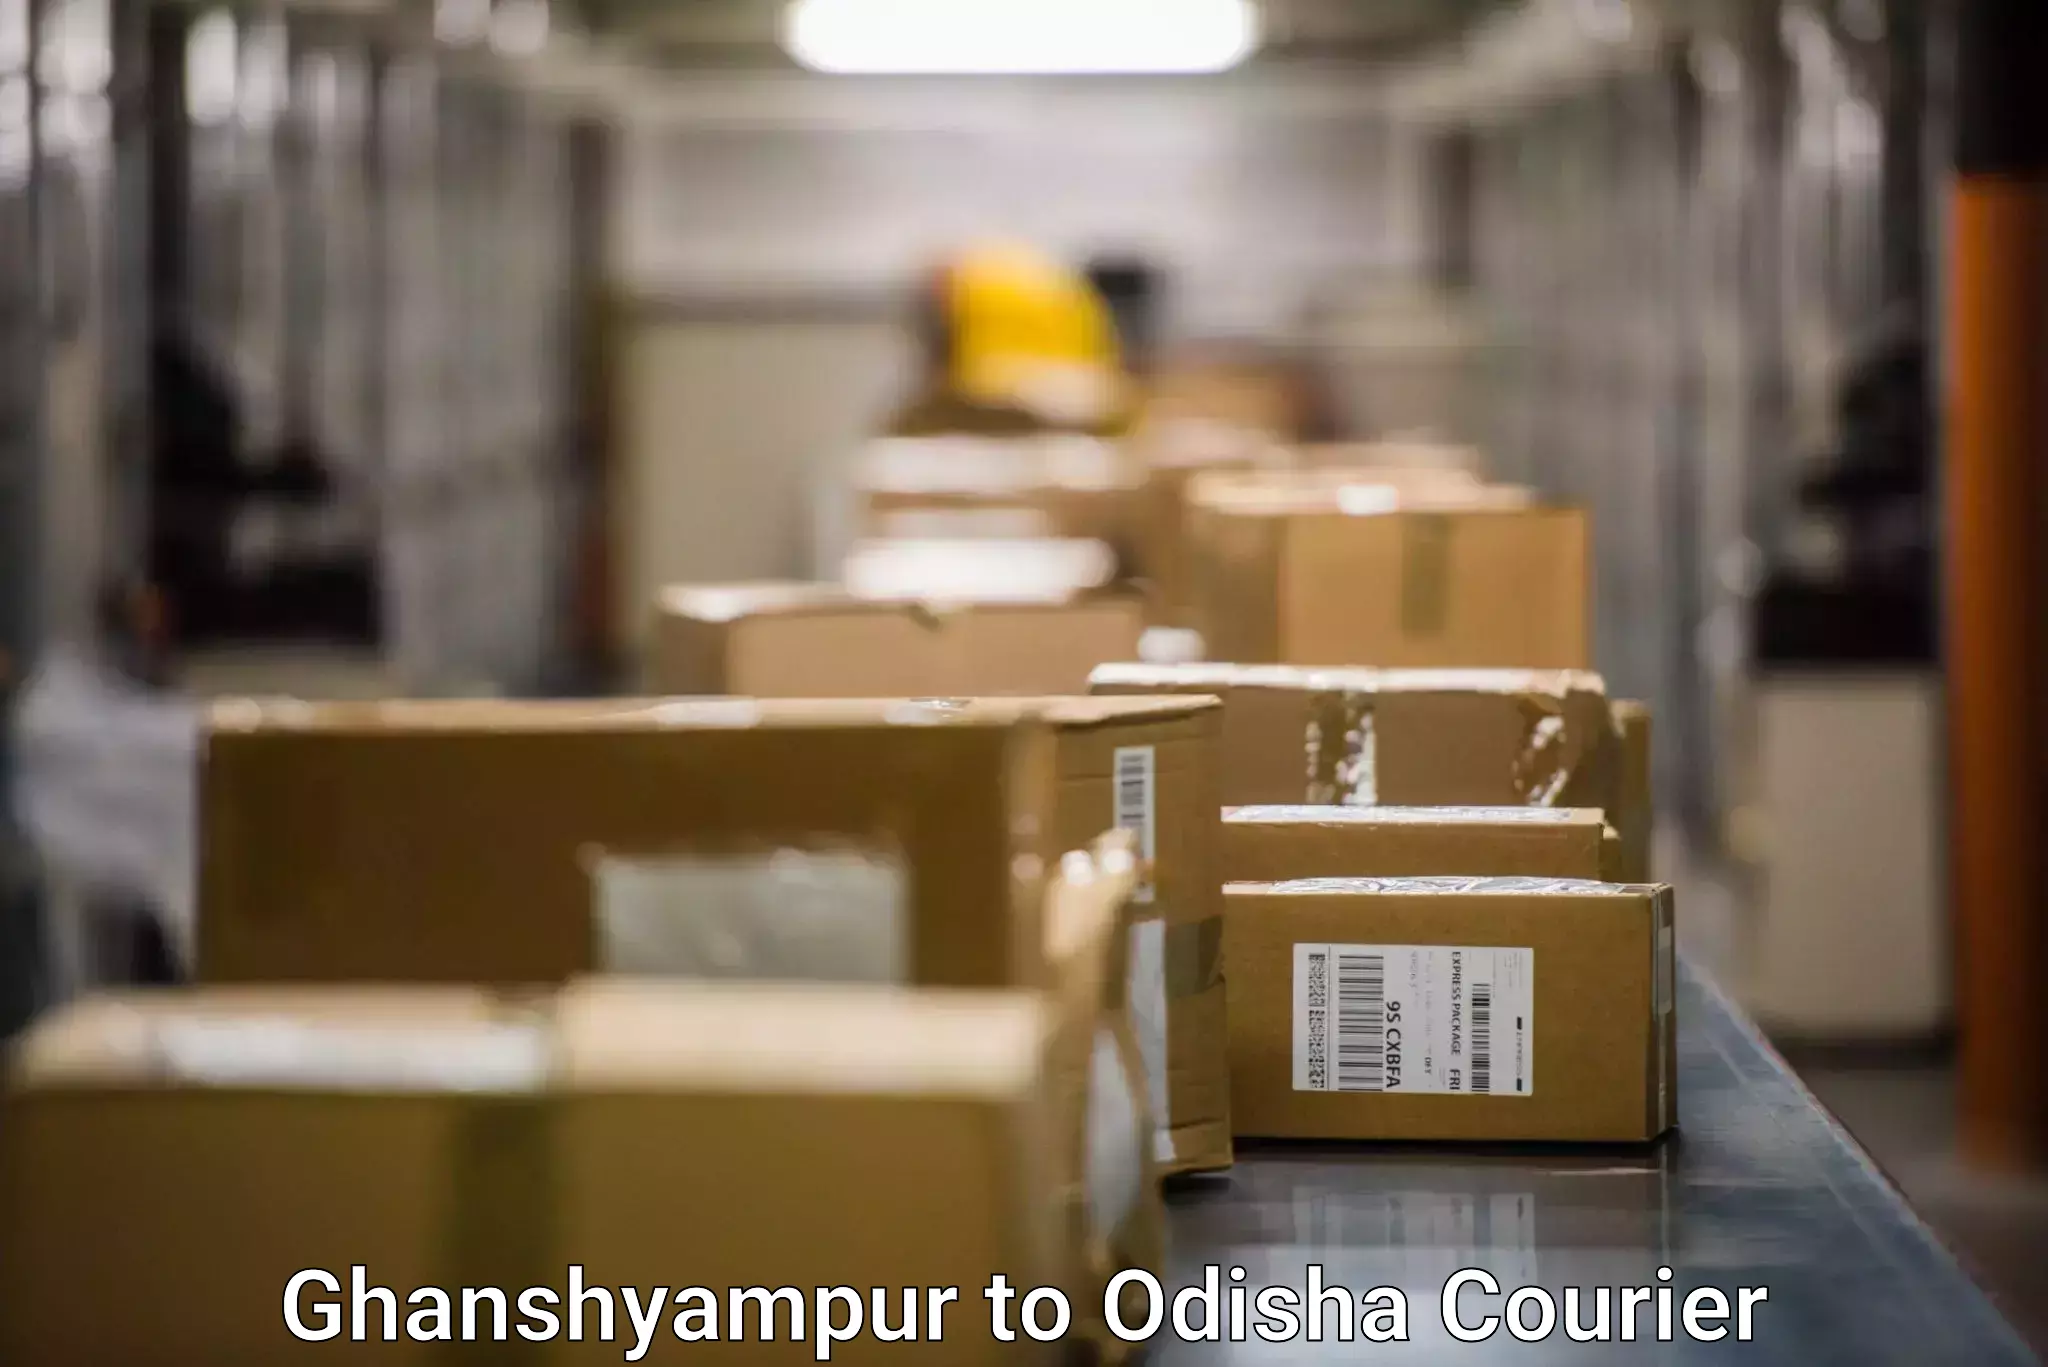 Parcel handling and care in Ghanshyampur to Dandisahi